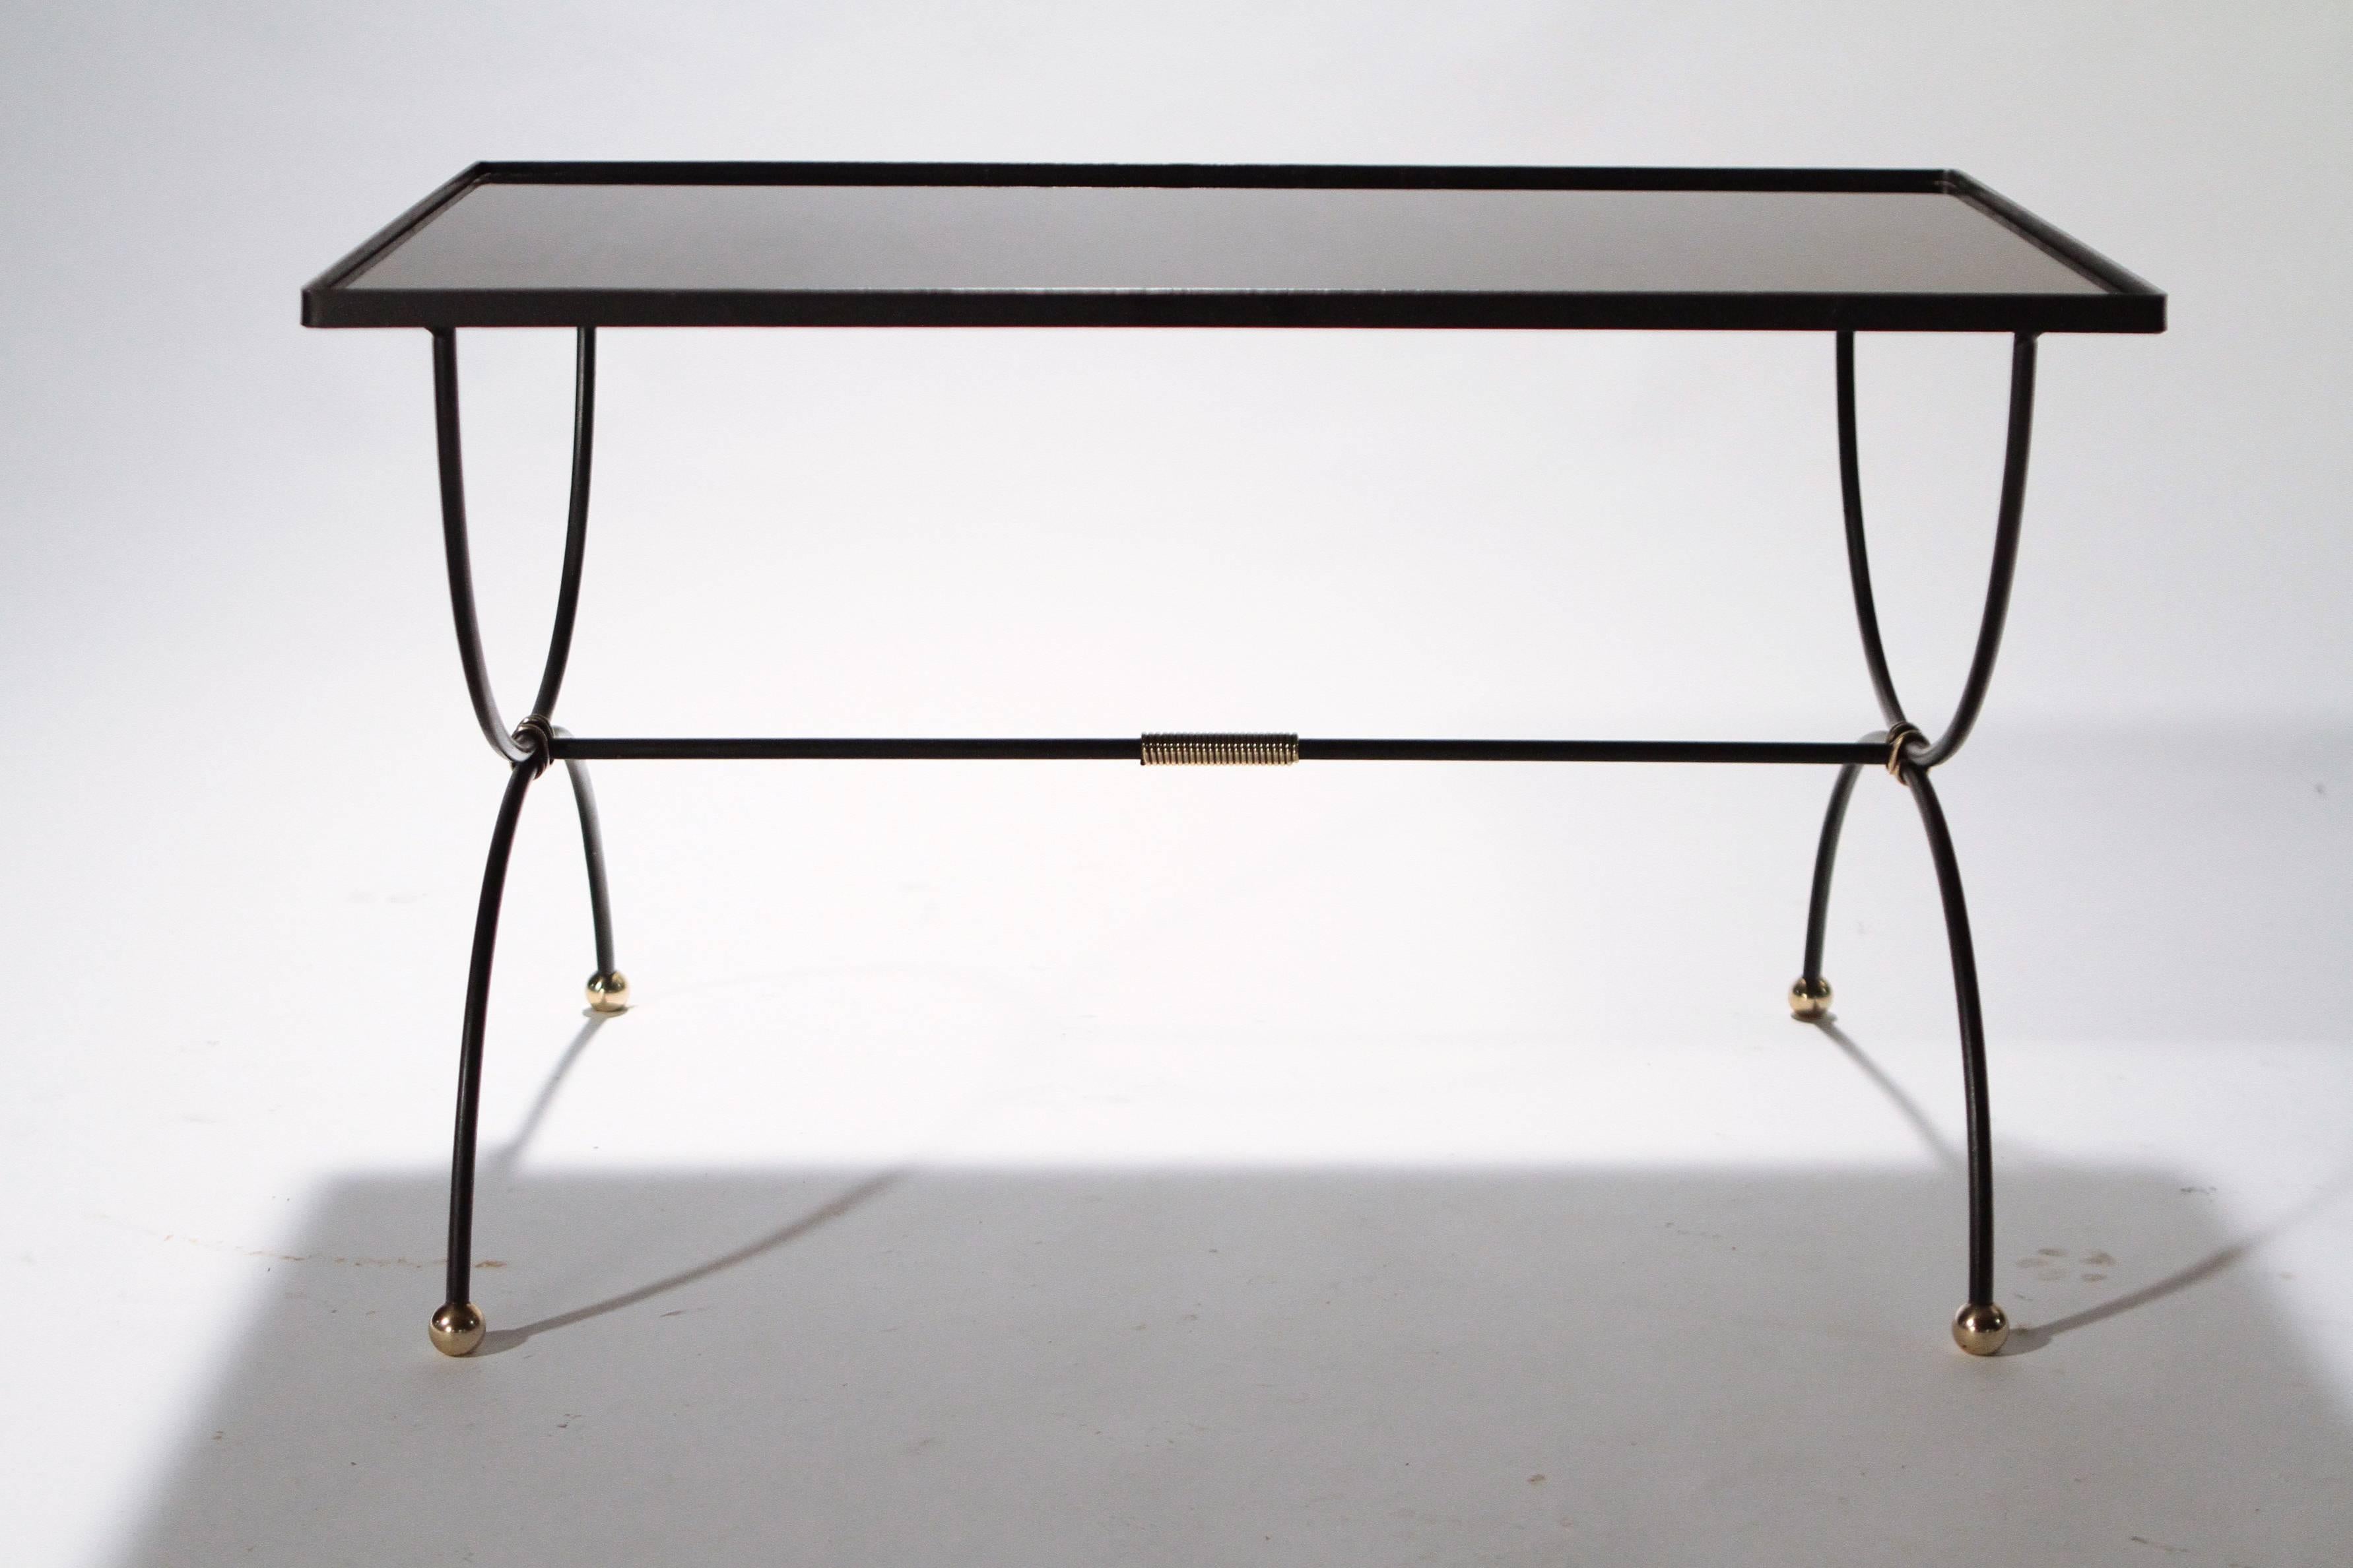 Grace your home with the true elegance of this black iron with brass details coffee table, attributed to Jacques Adnet. Featuring an opaline black top, and beautiful brass details, it will add character to your home and make a gracious compliment to